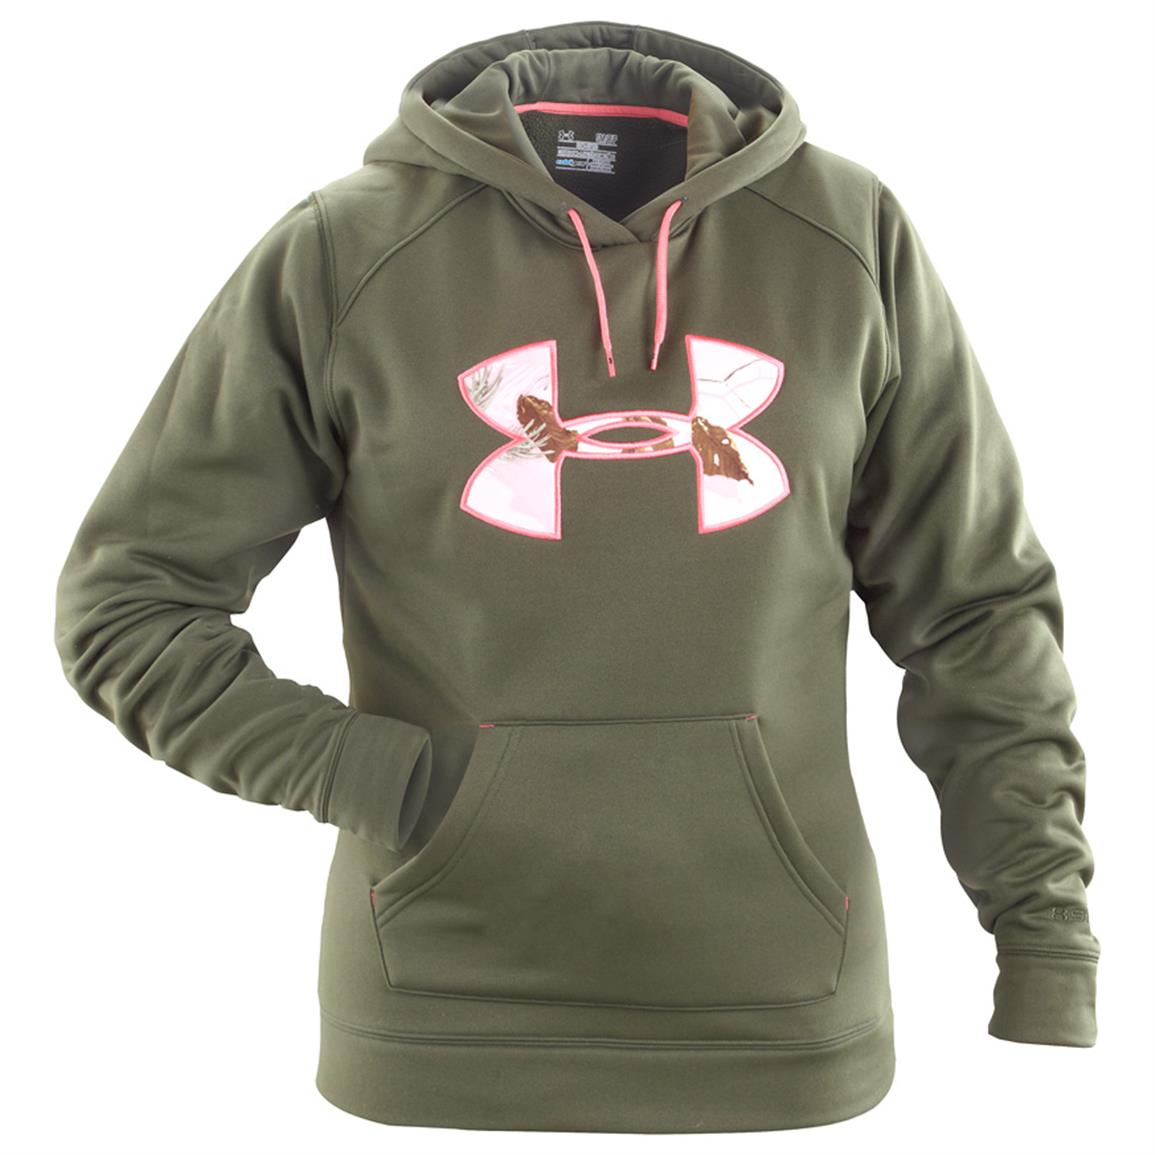 Cheap under armour new hoodies Buy 